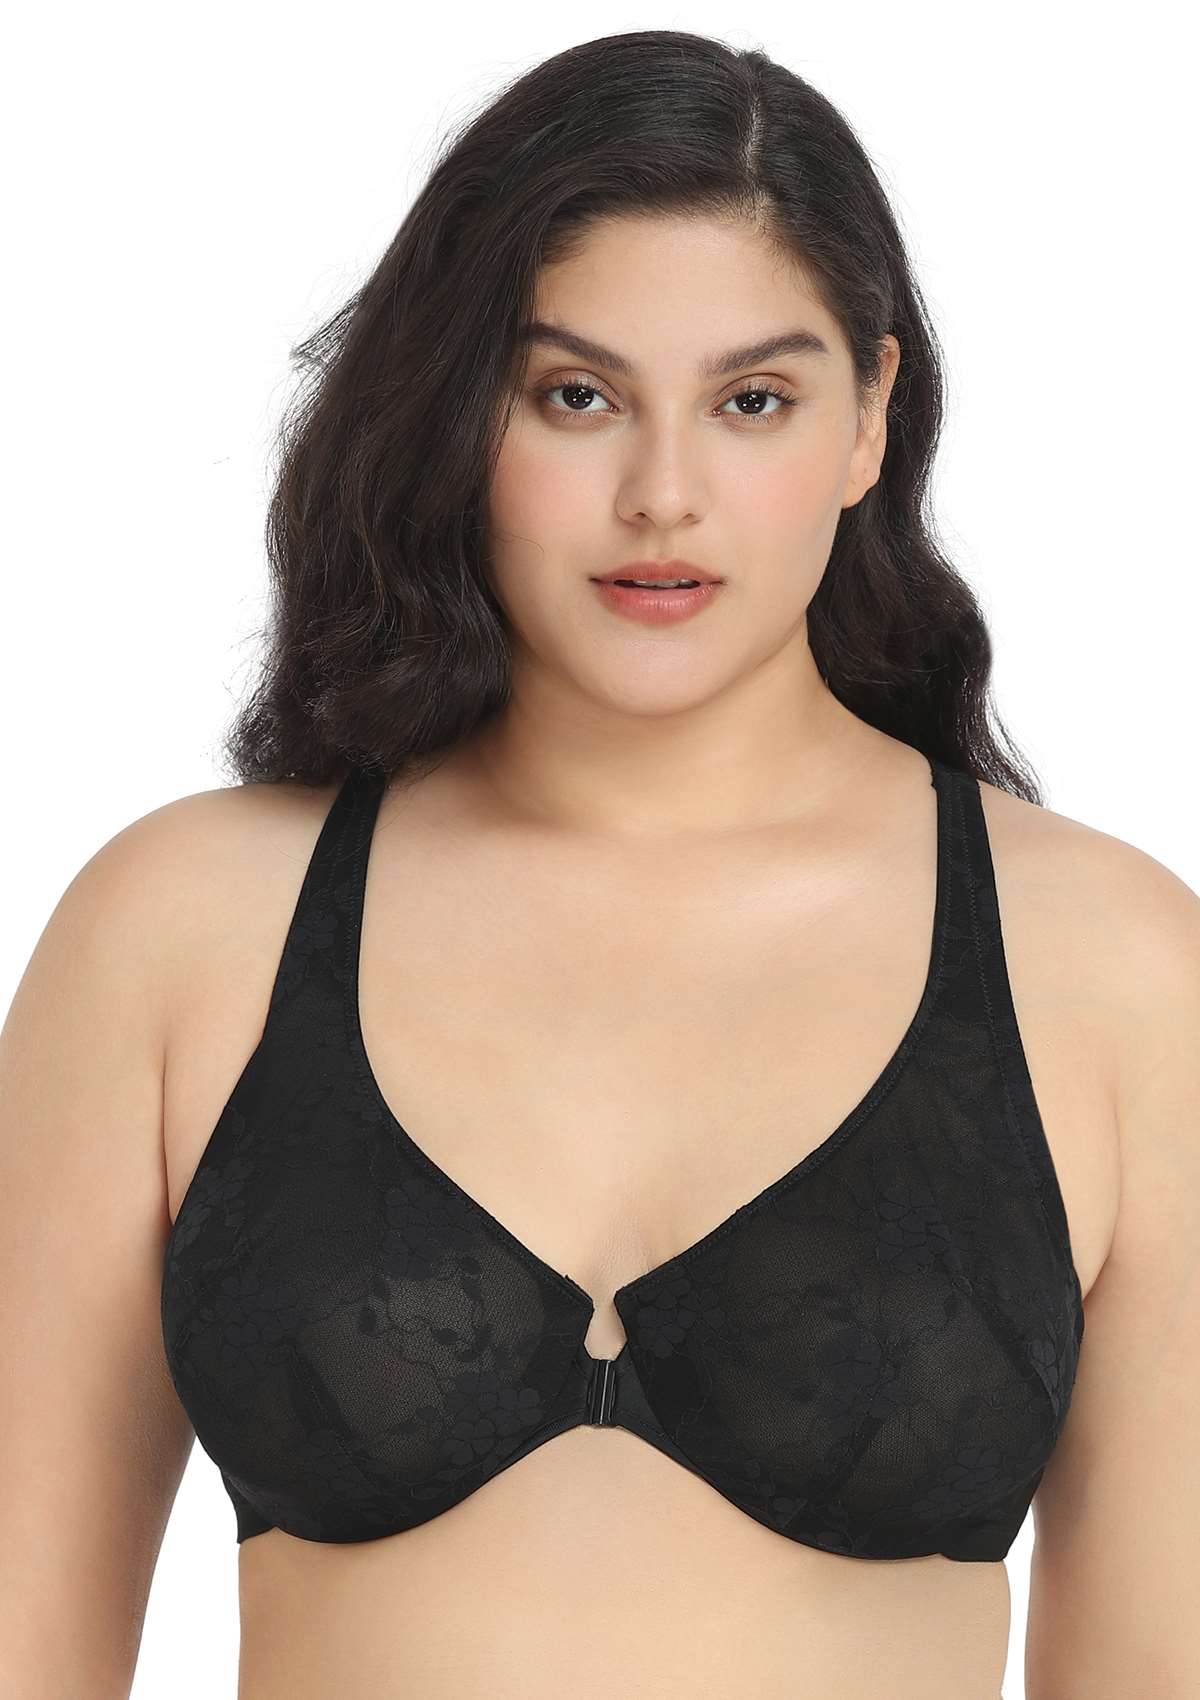 HSIA Spring Romance Front-Close Floral Lace Unlined Full Coverage Bra - Black / 36 / DDD/F